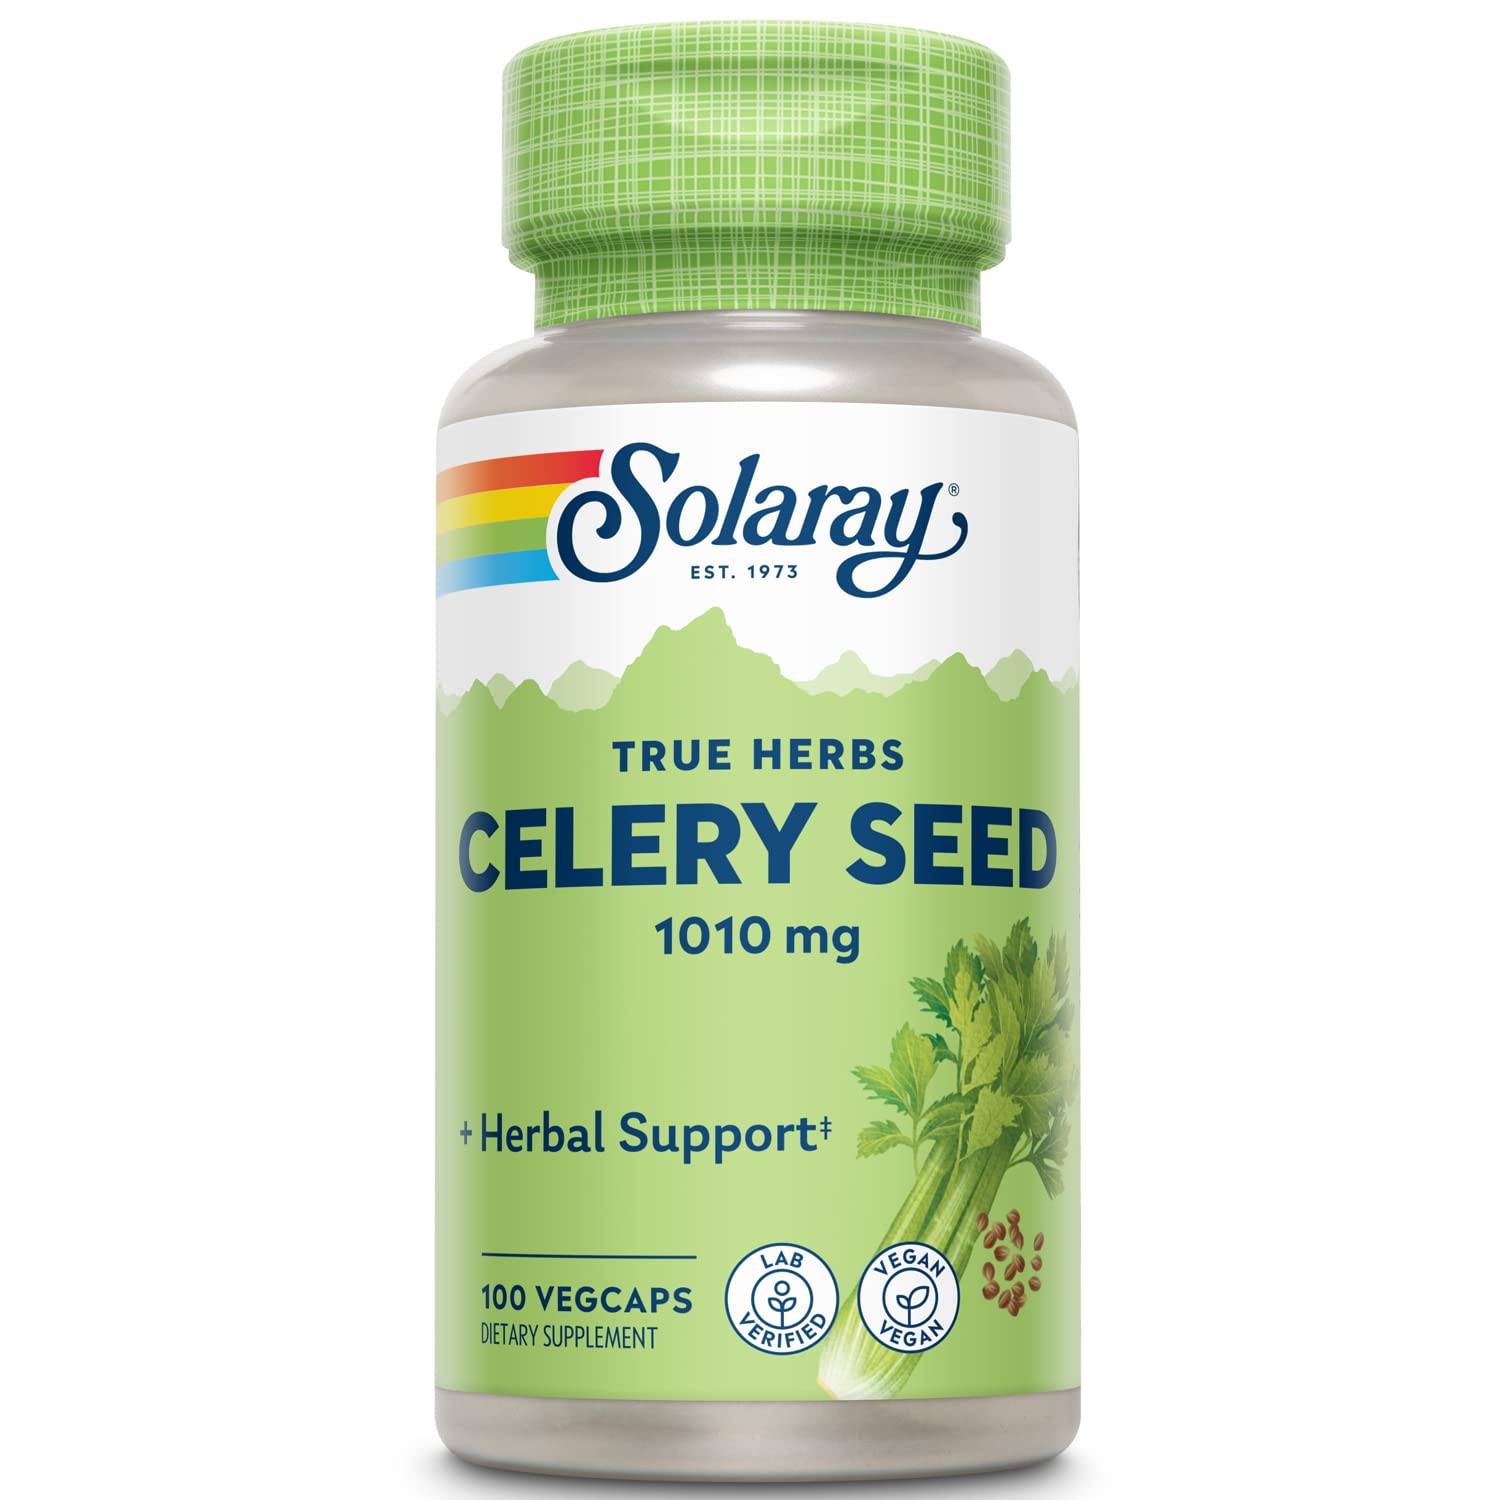 Solaray Celery Seed 505mg | Healthy Cardiovascular, Liver, Water Balance & Joint Support | Whole Seed w/Phytochemicals & Flavonoids | Non-GMO | 100ct